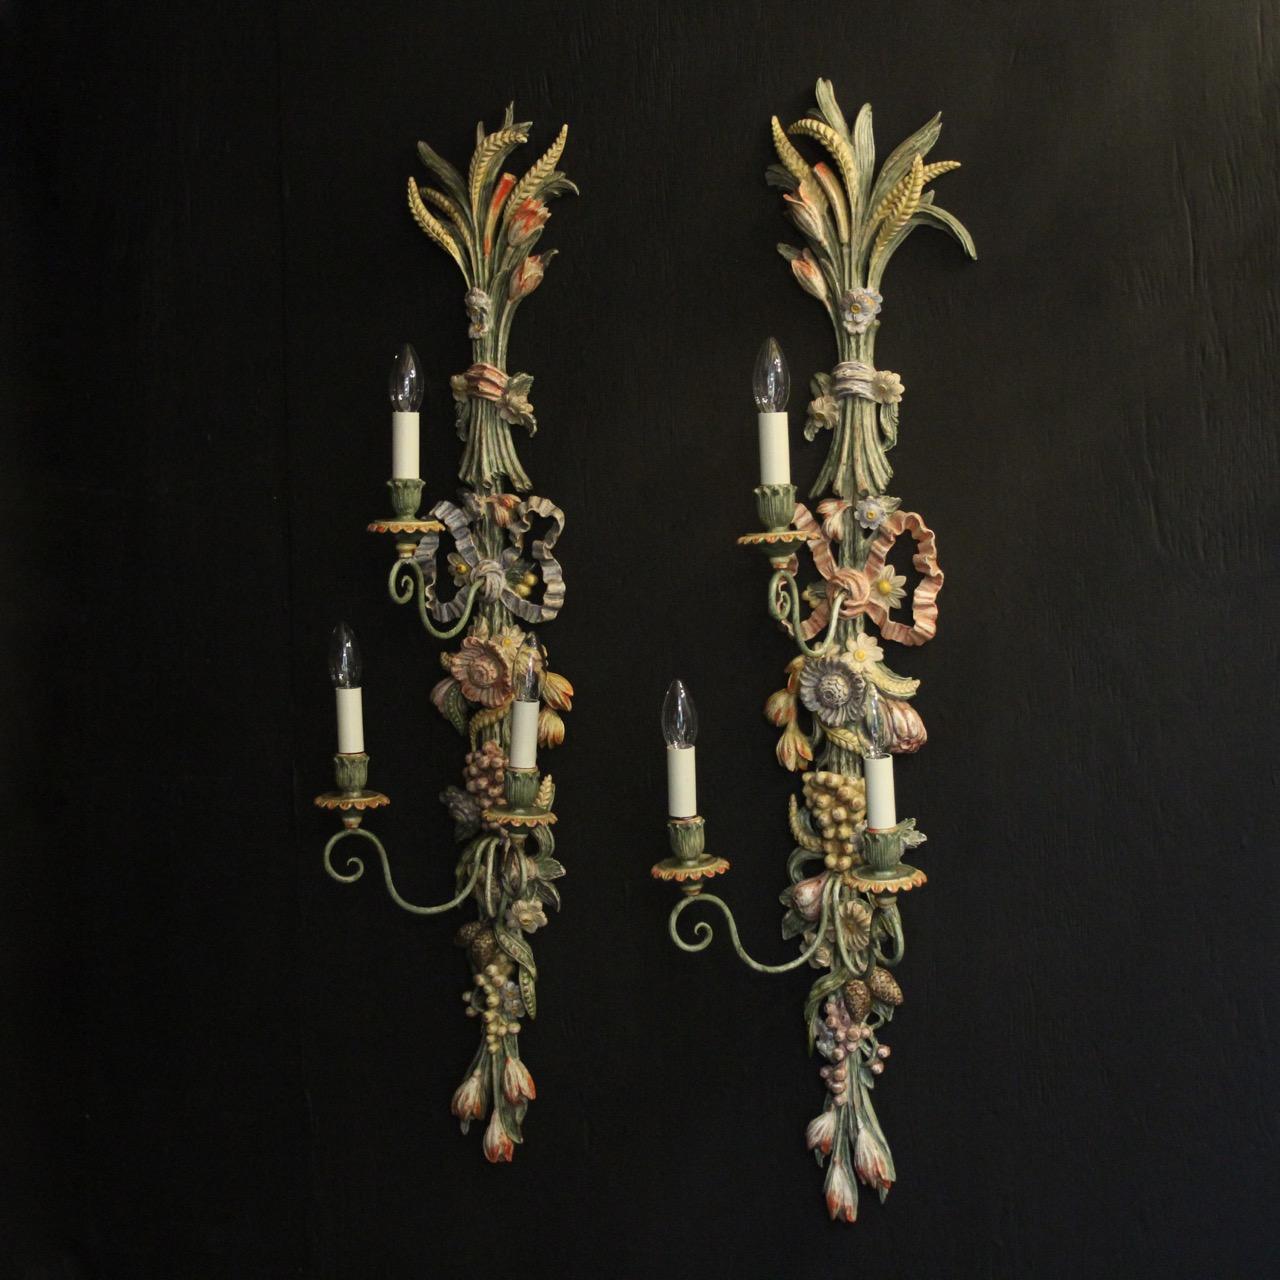 A Large pair of decorative Italian polychrome painted carved wood triple arm tiered wall lights, the simple scrolling arms with carved wooden candle sconces, issuing from a ornately carved pierced decorative floral and ribbon clad backplate, lovely